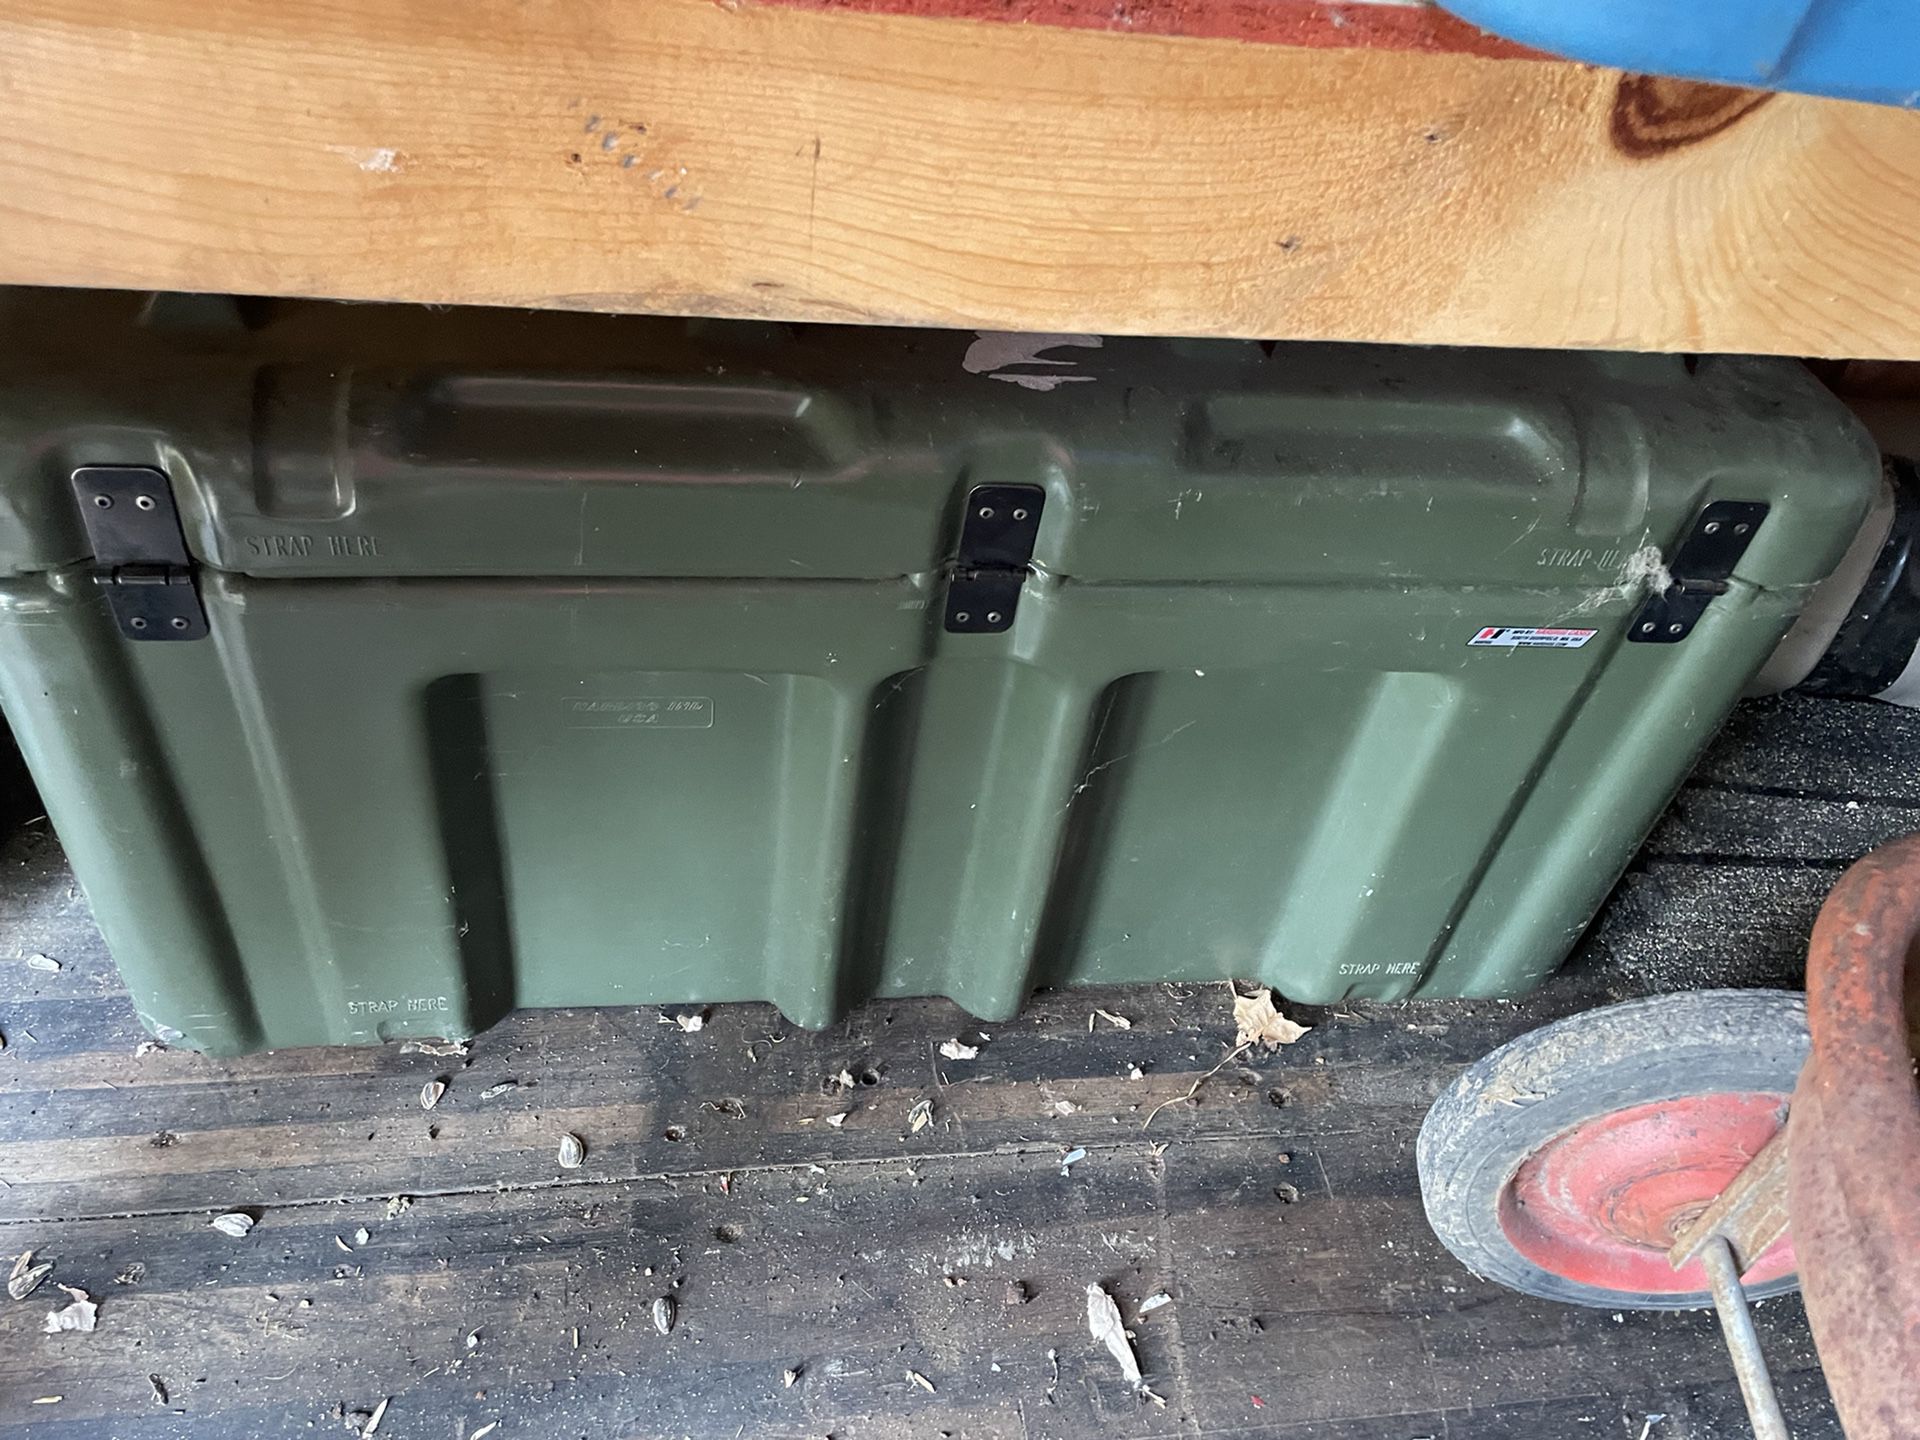 Foot locker/Storage Box. Military? 64x11x13 Metal hinges, edges and clip  on front. Yellow marking on top and yellow letter on end. Can't identify  the markings. : r/whatisthisthing